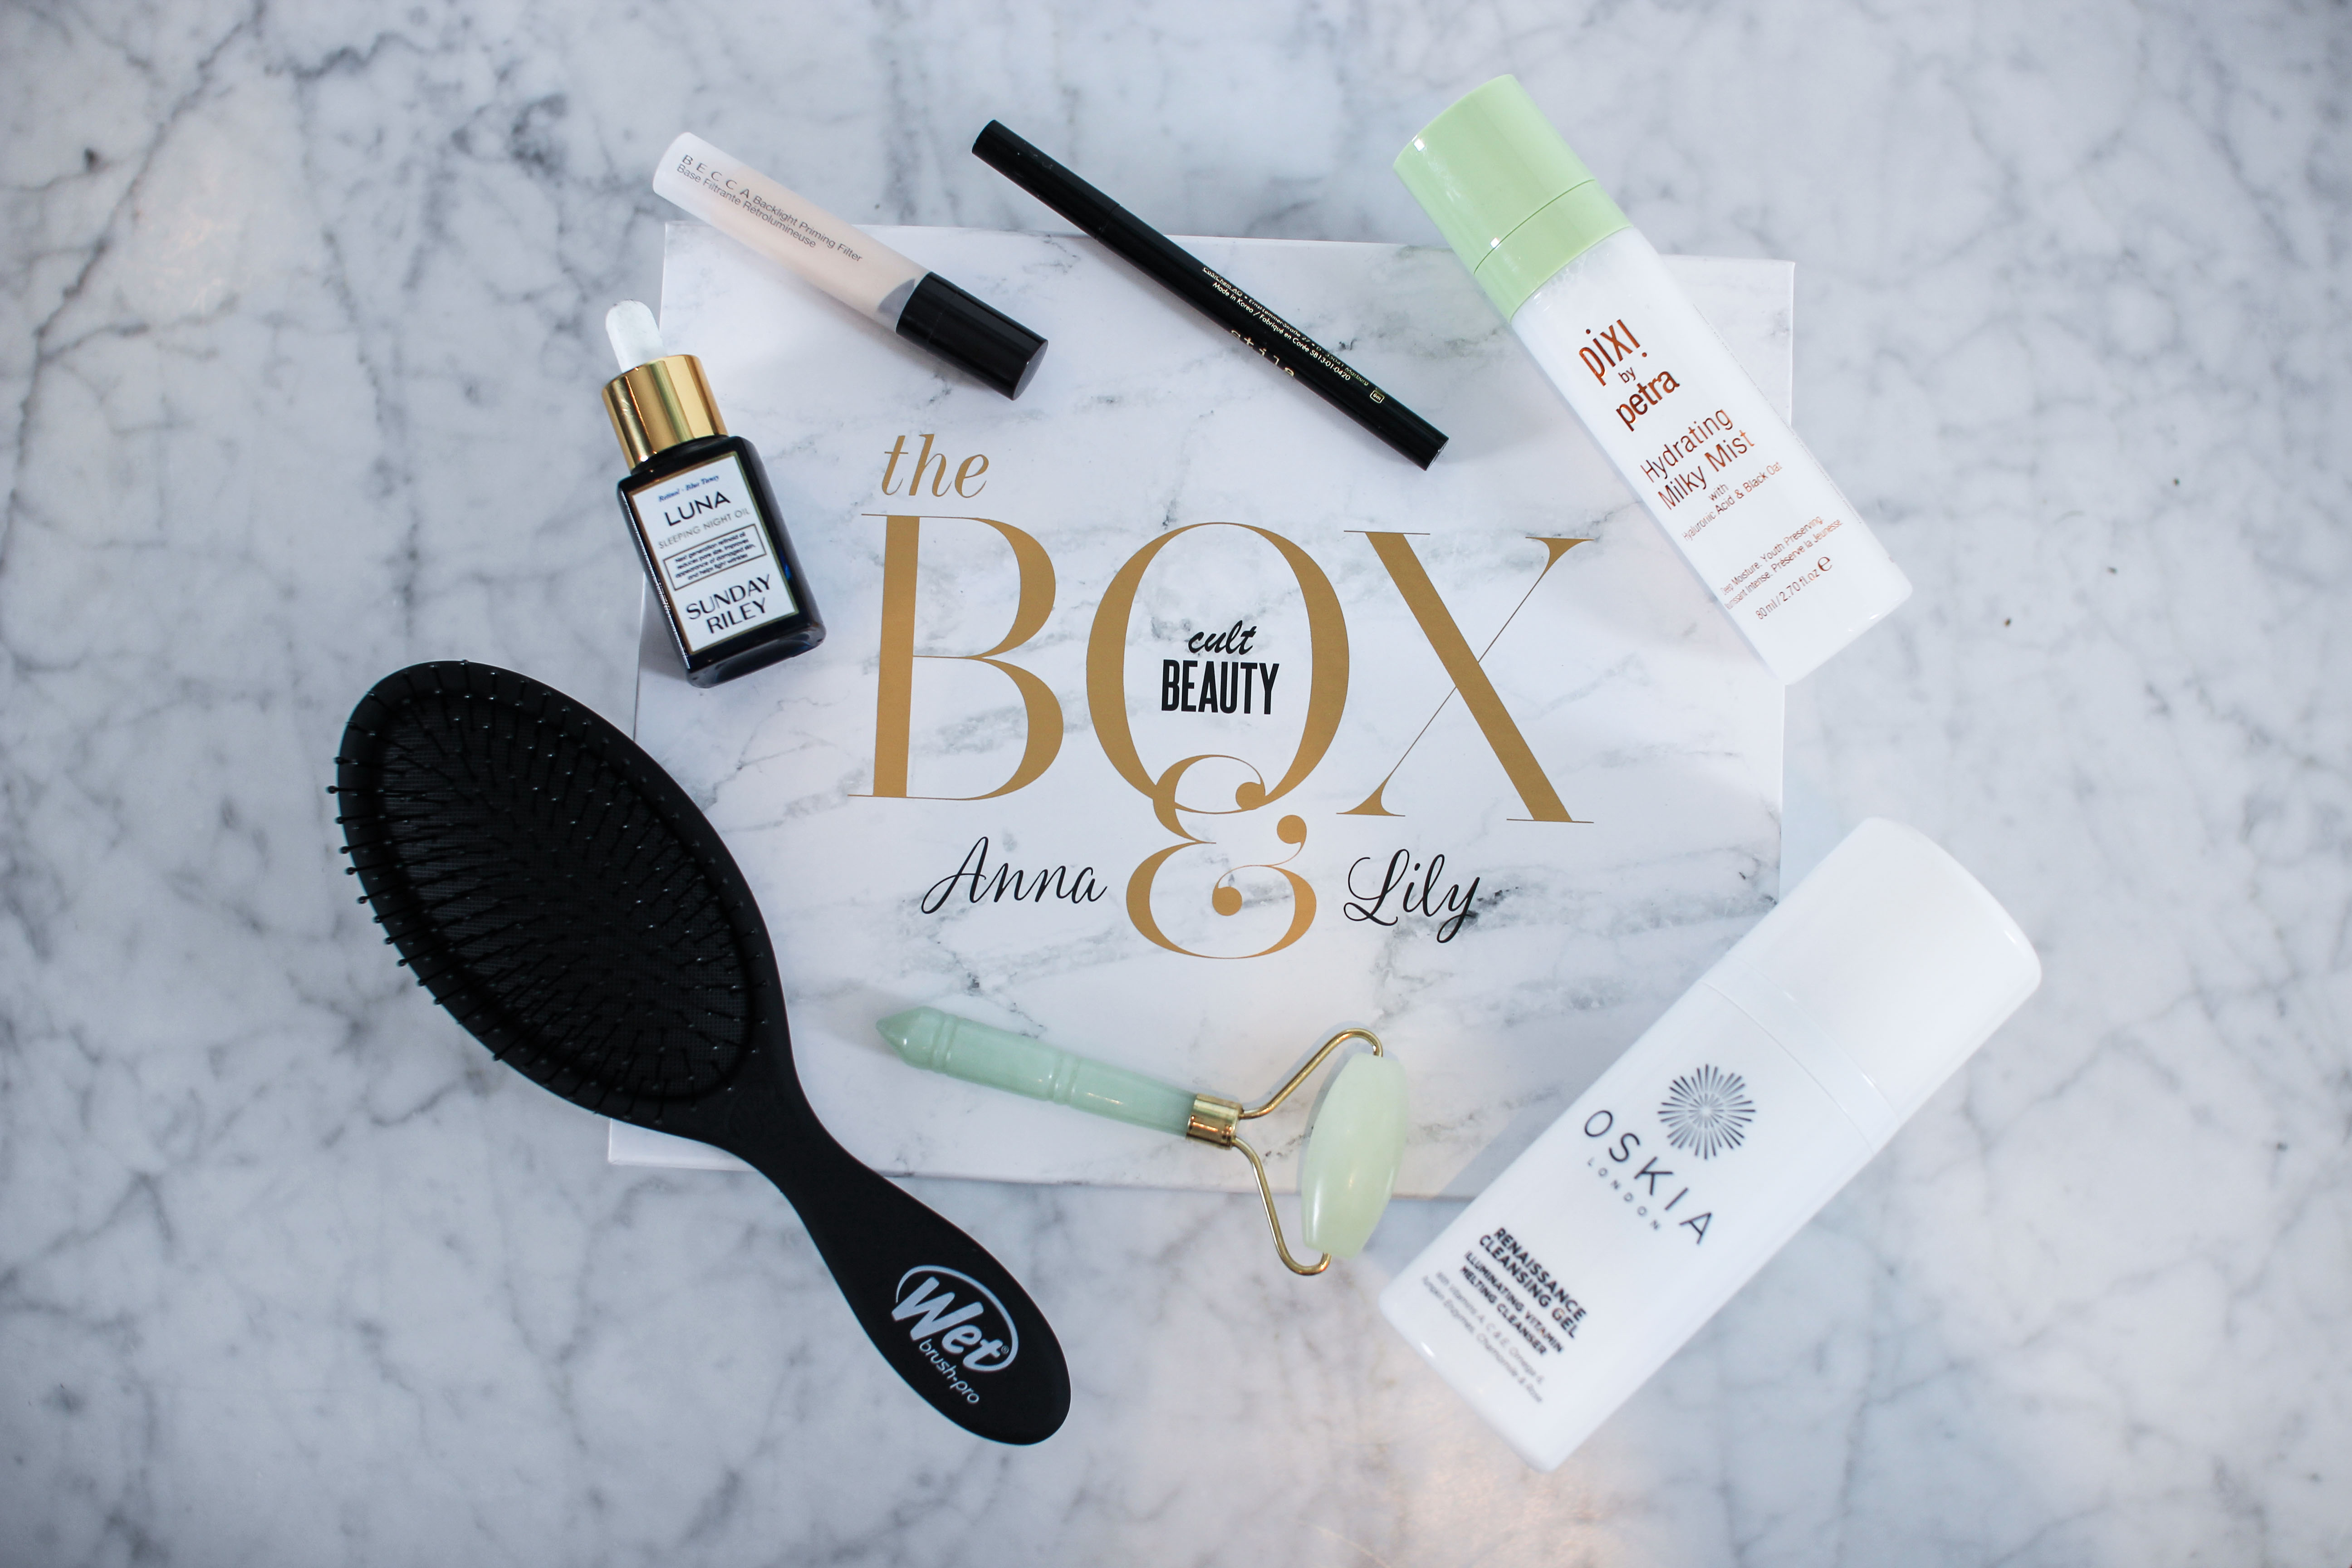 THE ANNA & LILY CULT BEAUTY BOX!!! | AD